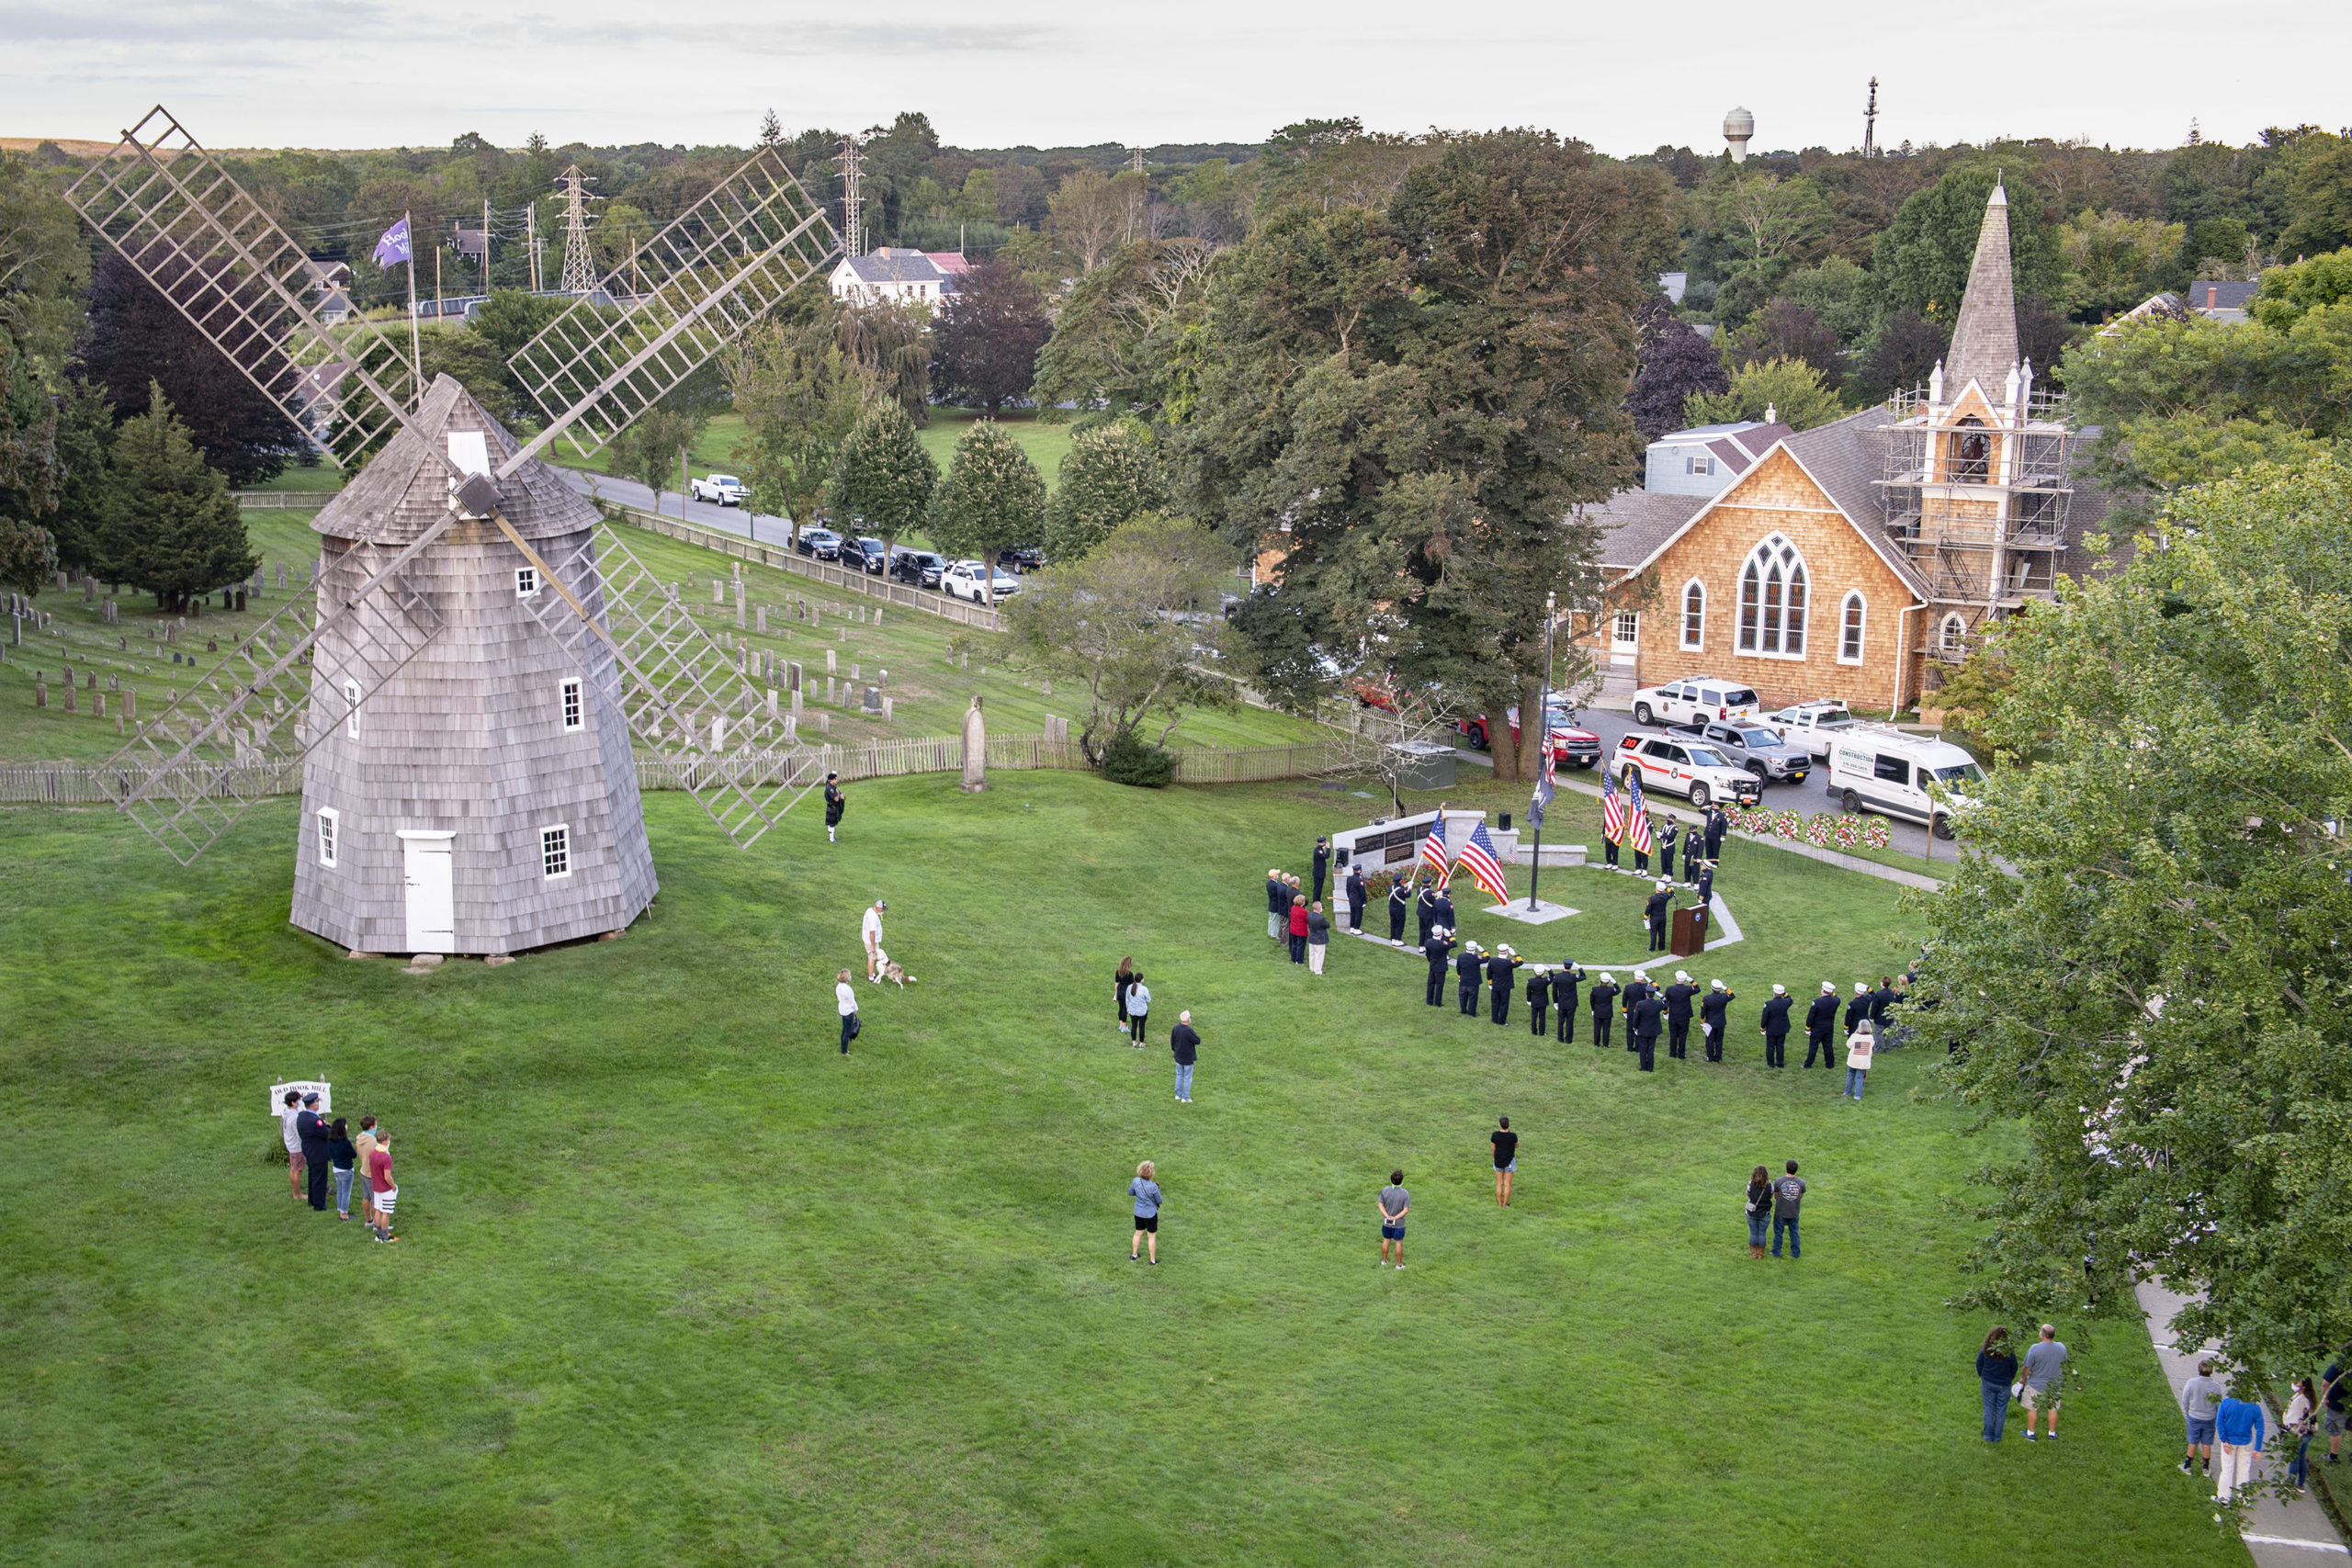 Members of the East End Fire, EMS and Police Departments held a memorial service on the village green in East Hampton commemorating the 19th anniversary of the September 11, 2001 terrorist attacks.